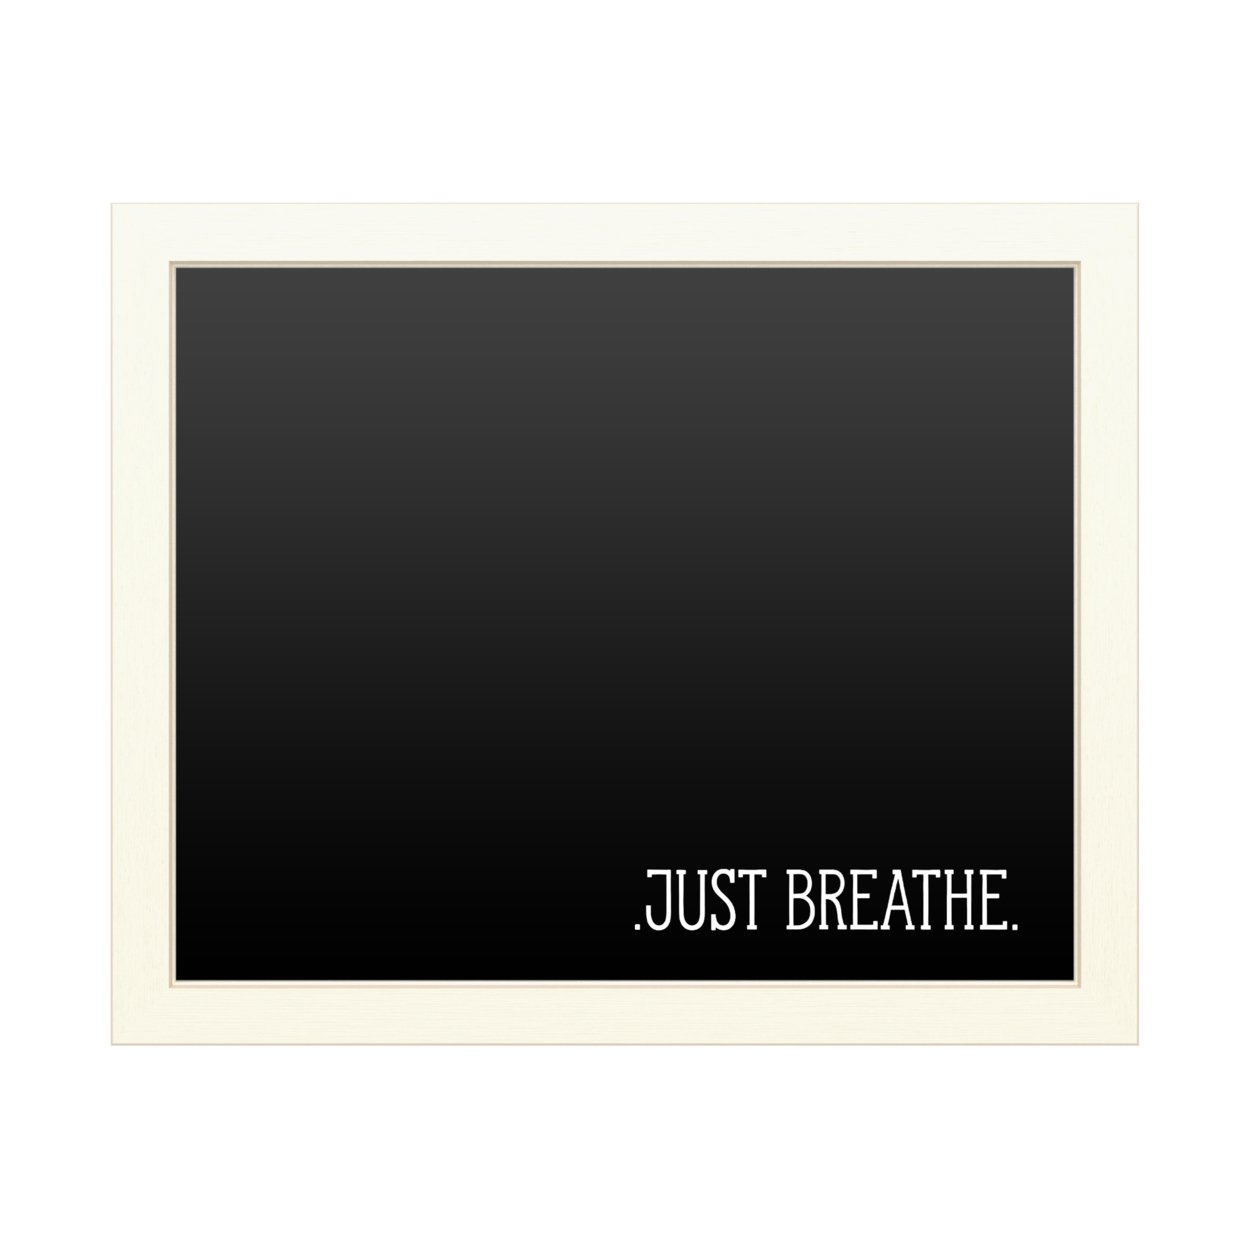 16 X 20 Chalk Board With Printed Artwork - Just Breathe White Board - Ready To Hang Chalkboard